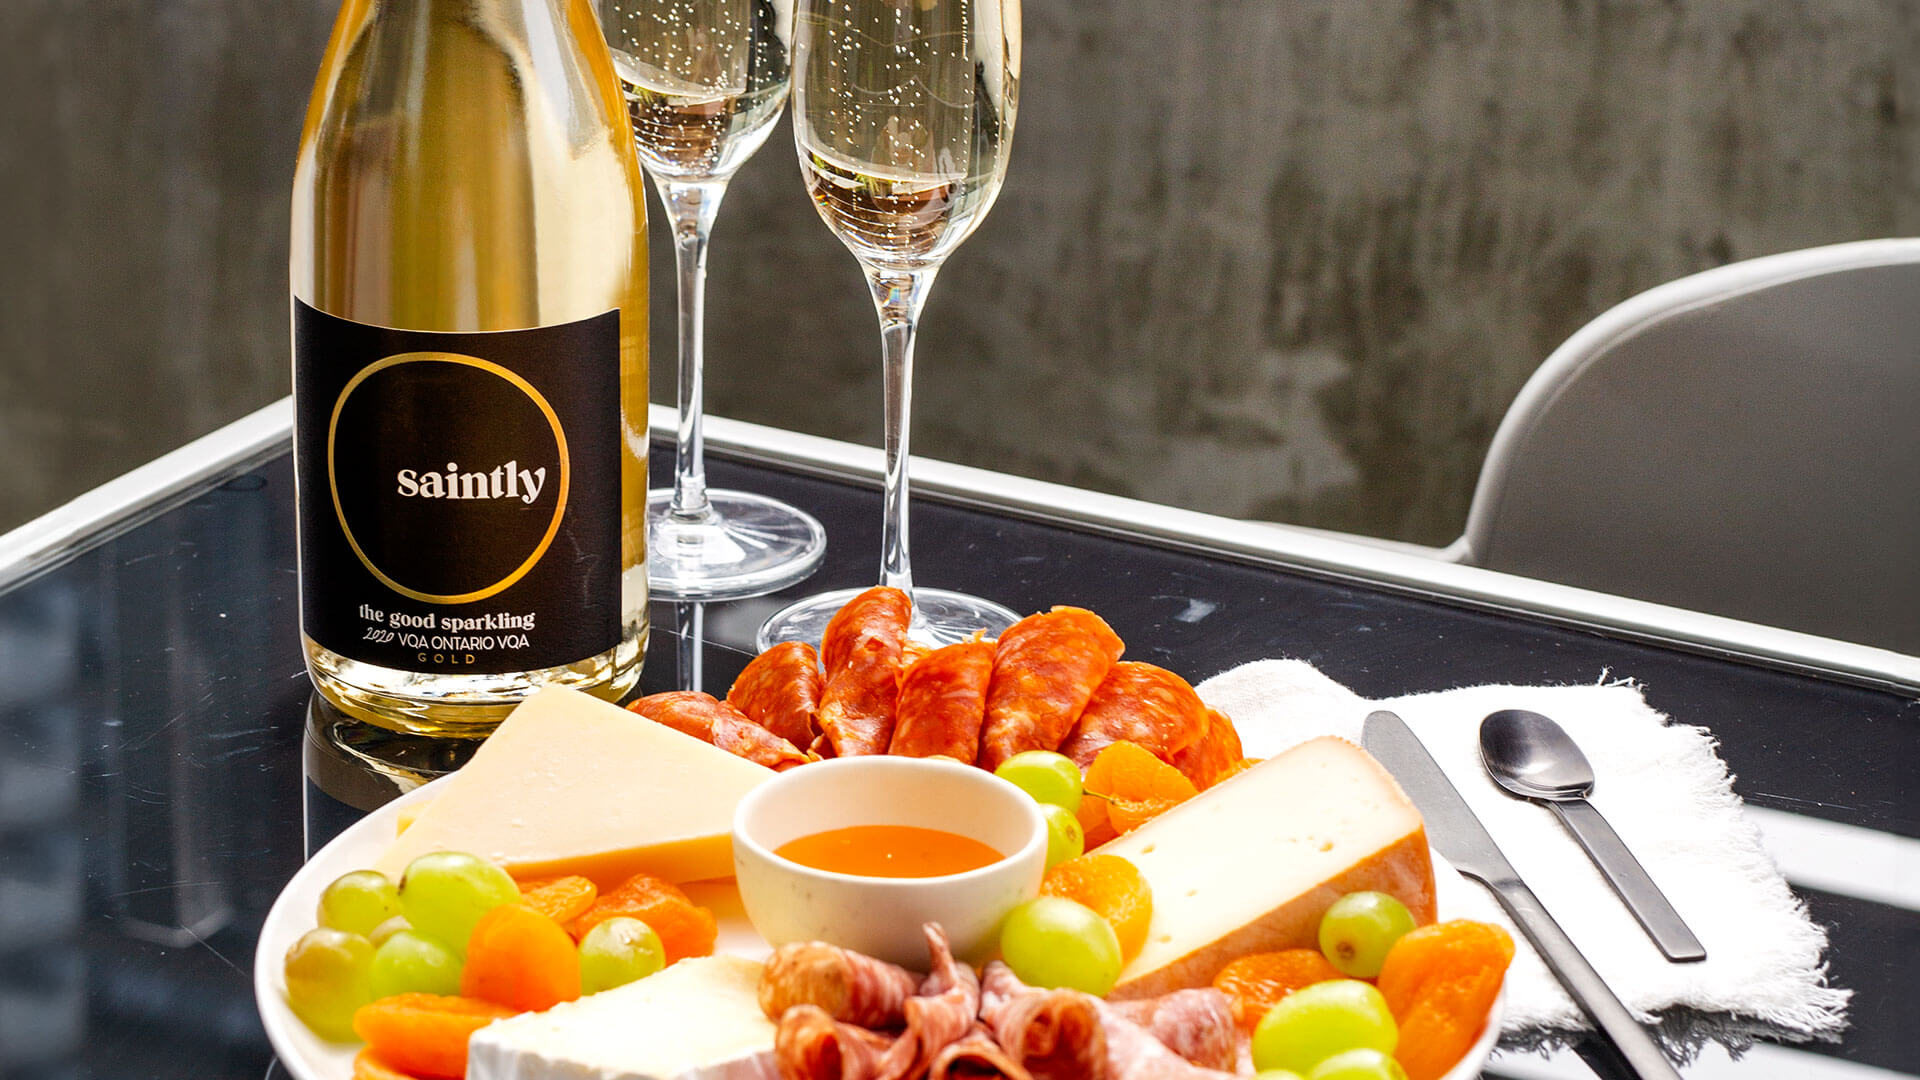 Saintly the Good Sparkling Wine paired with various cheeses, fruits and cured meats. 